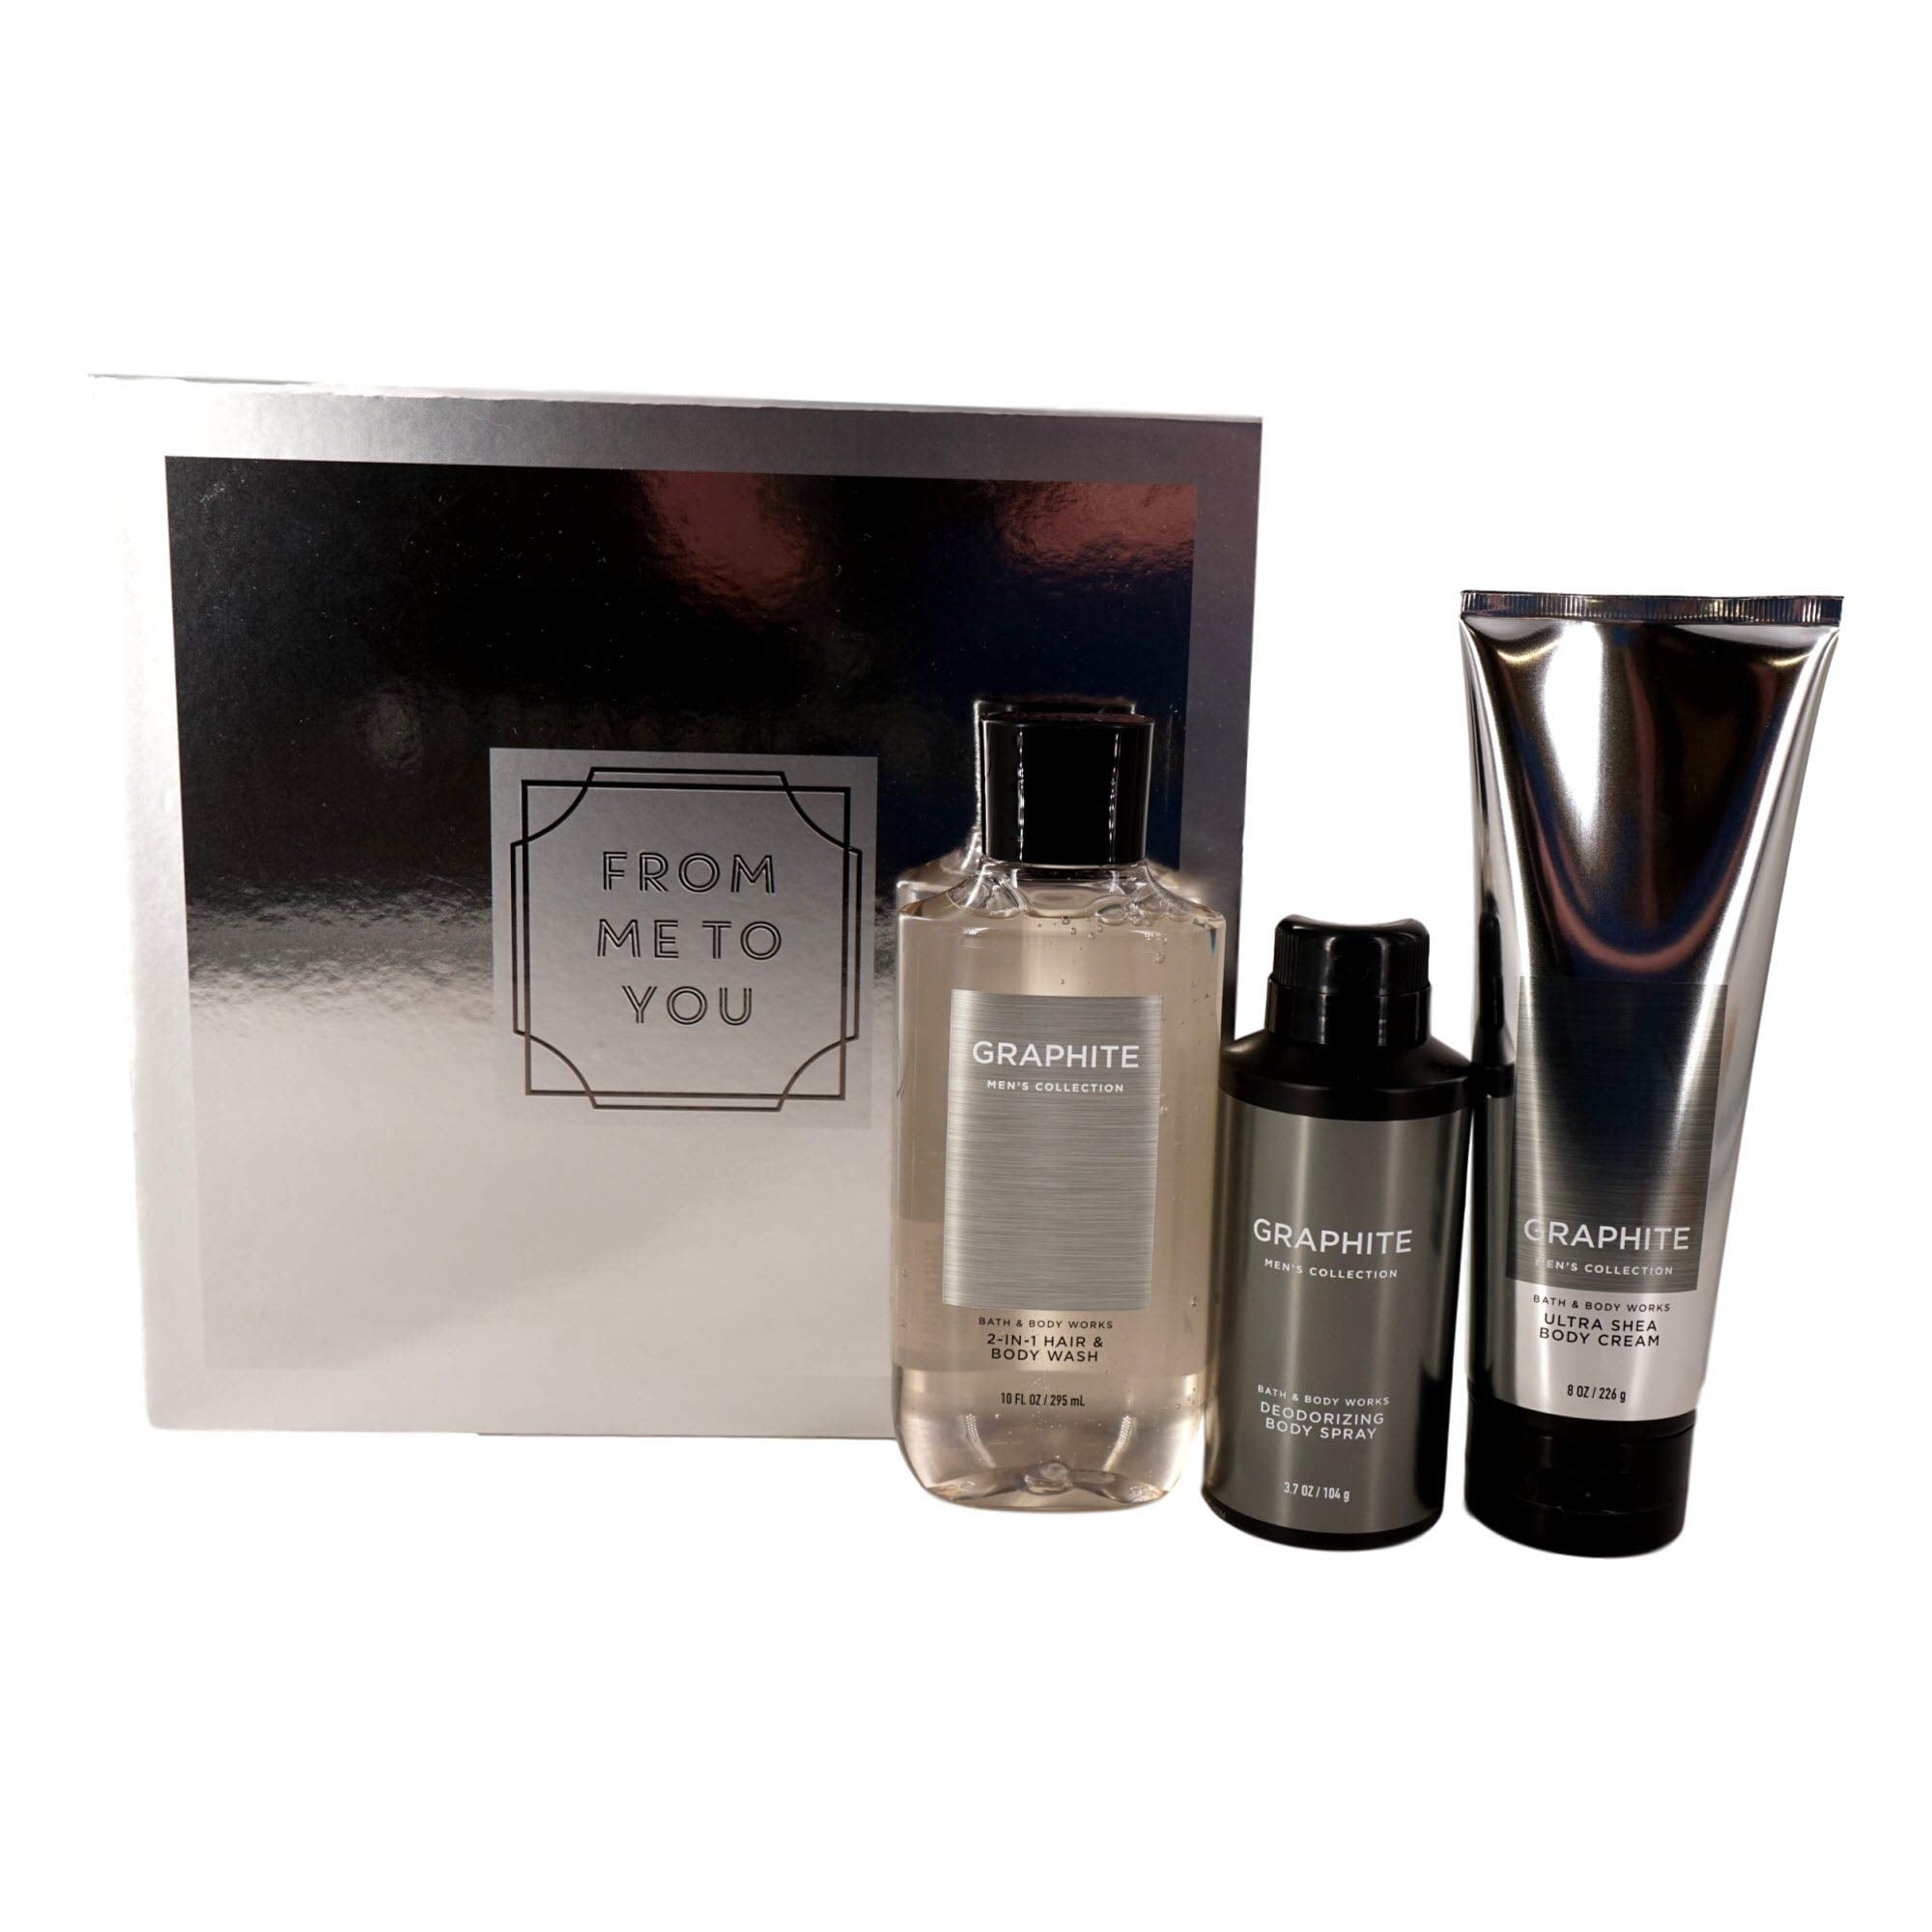 Graphite for Men Gift Box Set for Me to You - 2-in-1 Hair + Body Wash, Ultra Shea Body Cream and Deodorizing Body Spray Arranged in An Easel-Style